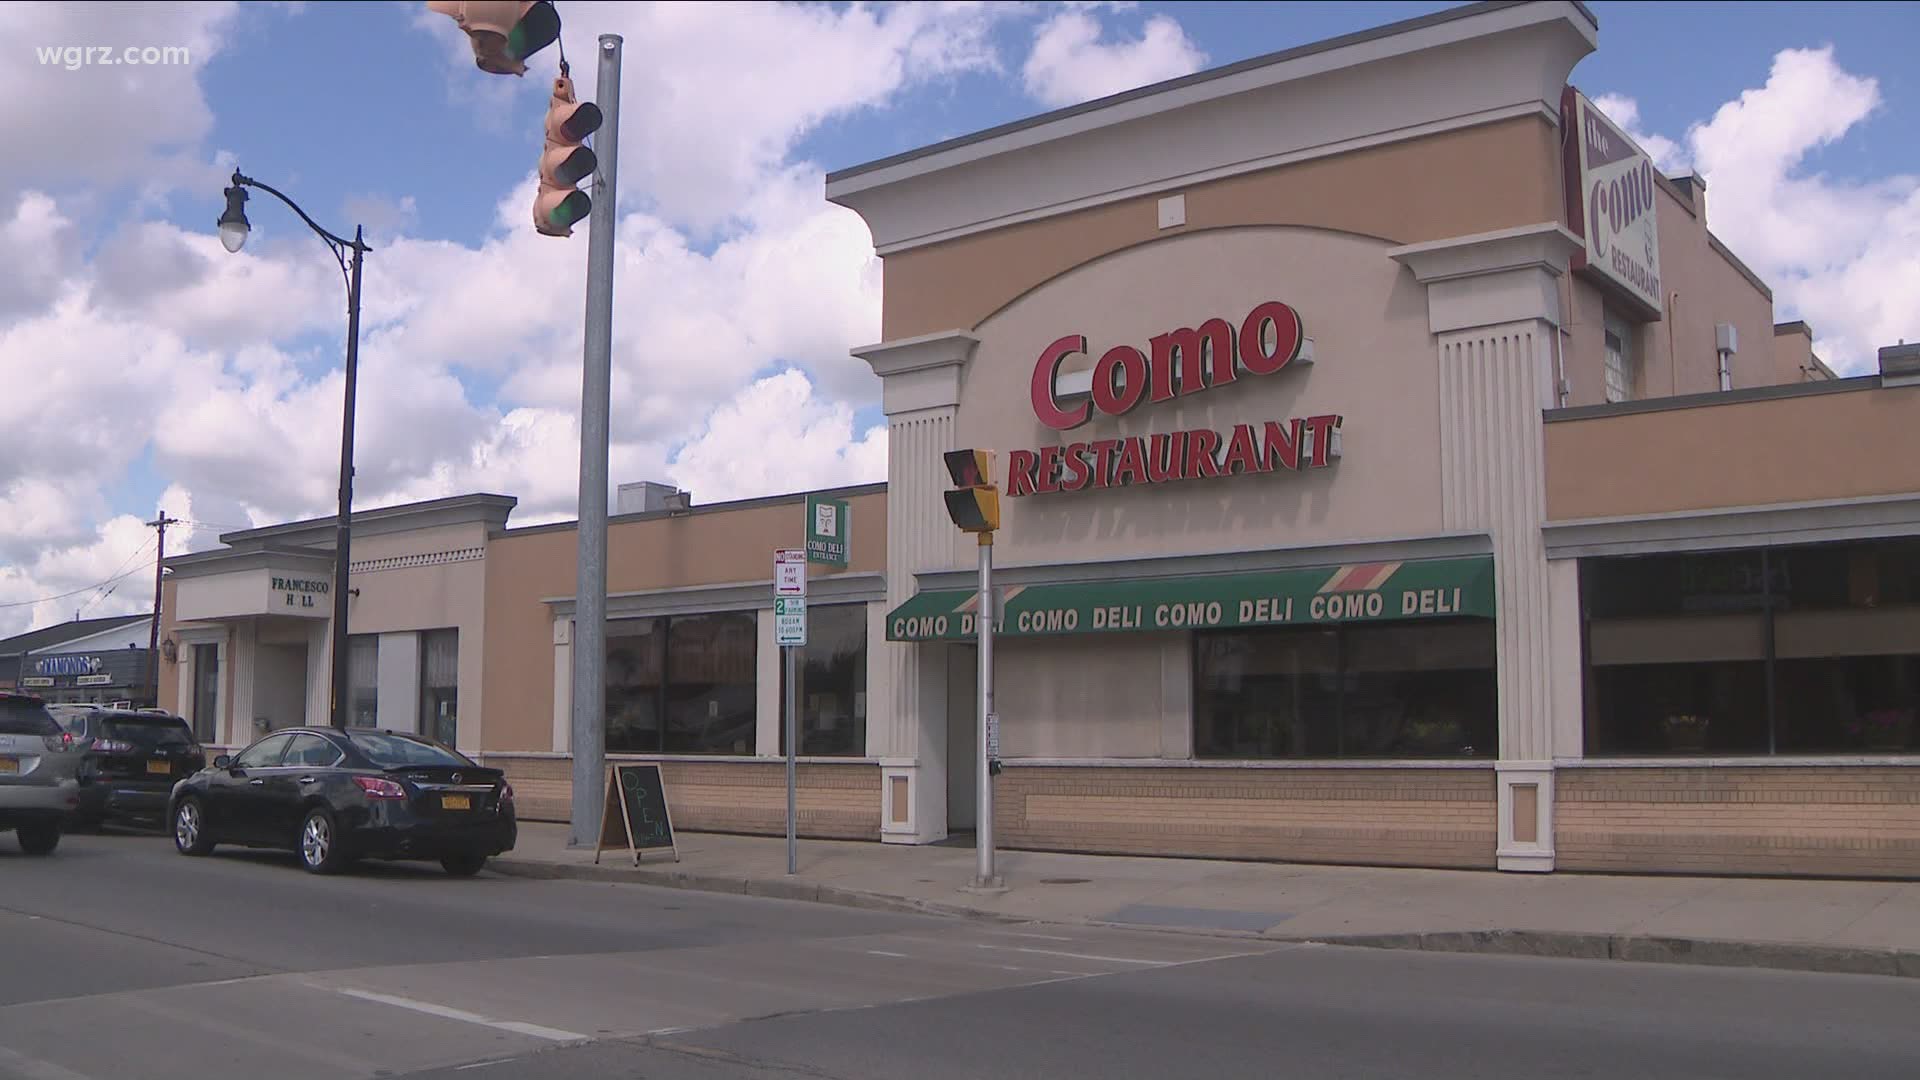 iconic restaurant that's been serving folks in the falls for more than 90 years... is up for sale tonight.